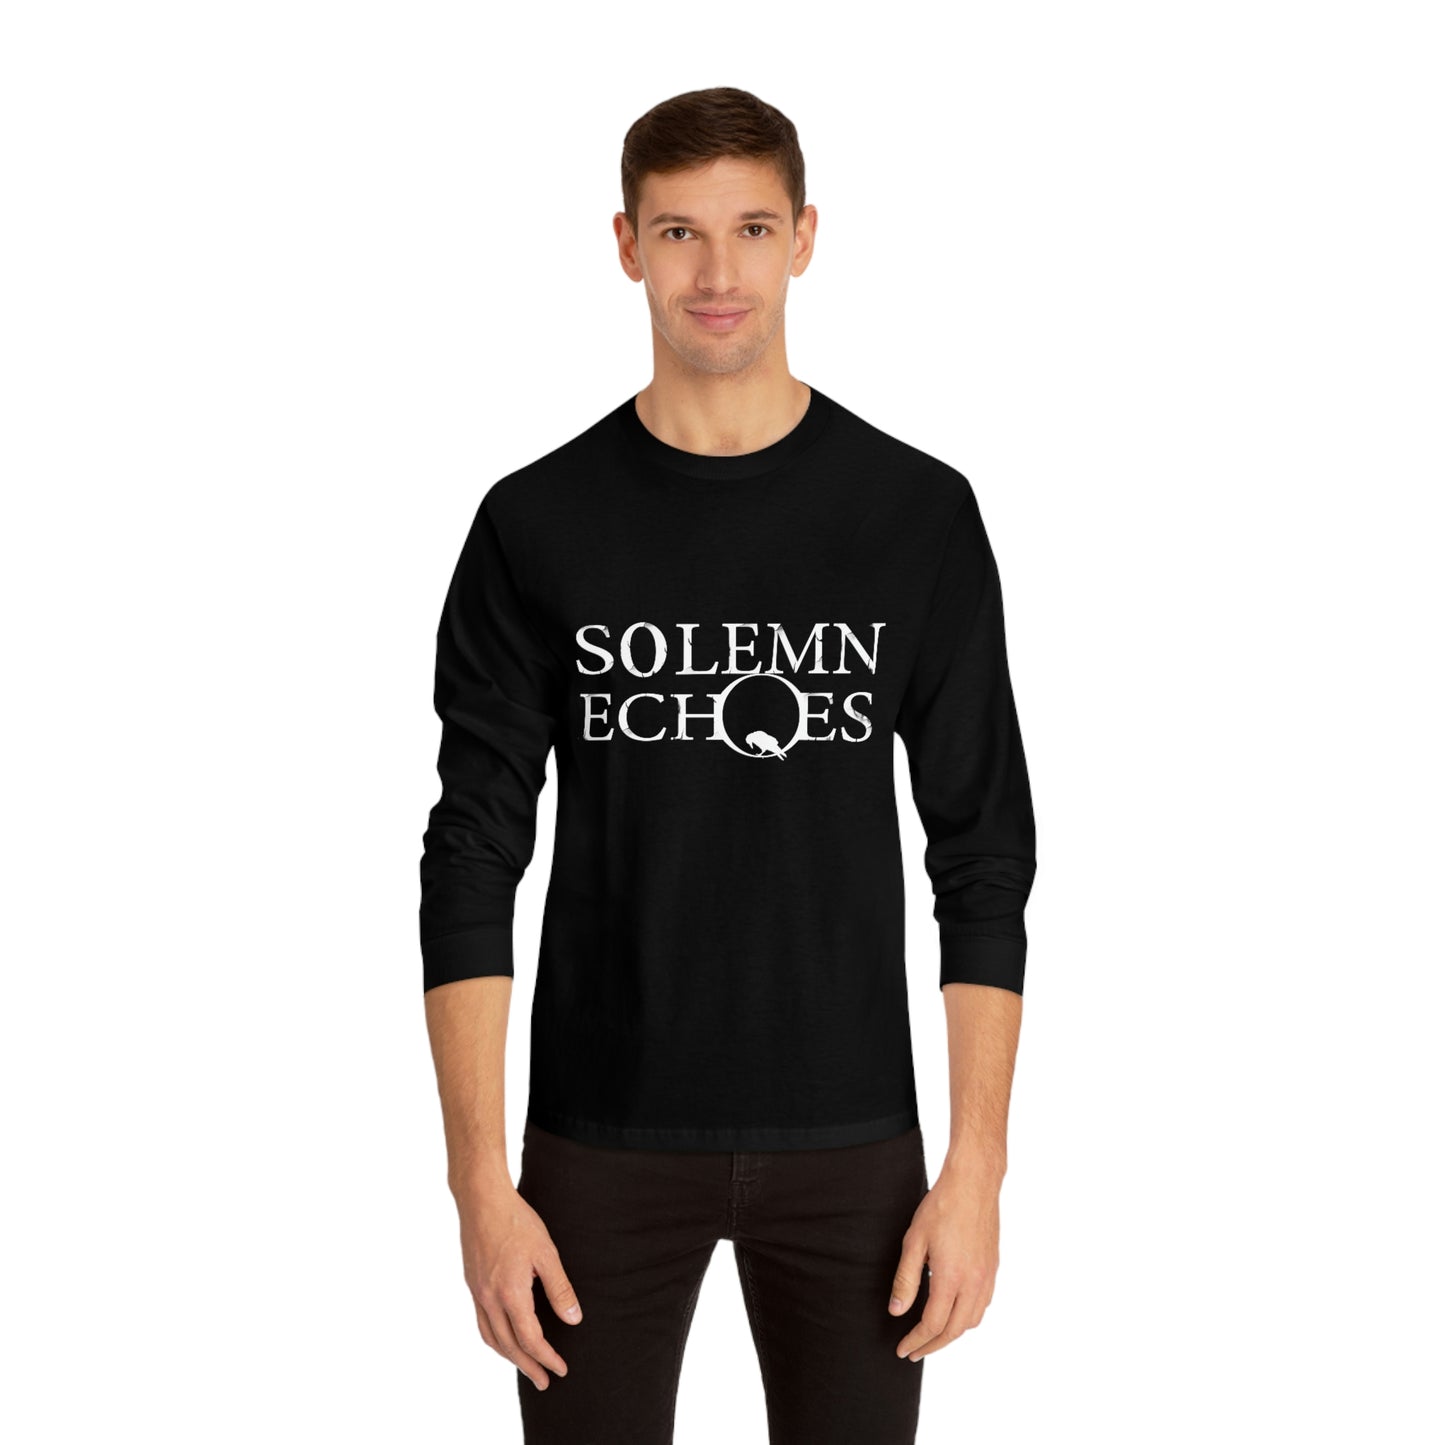 Solemn Echoes - Long Sleeve T-Shirt (US/CANADA/MEXICO)